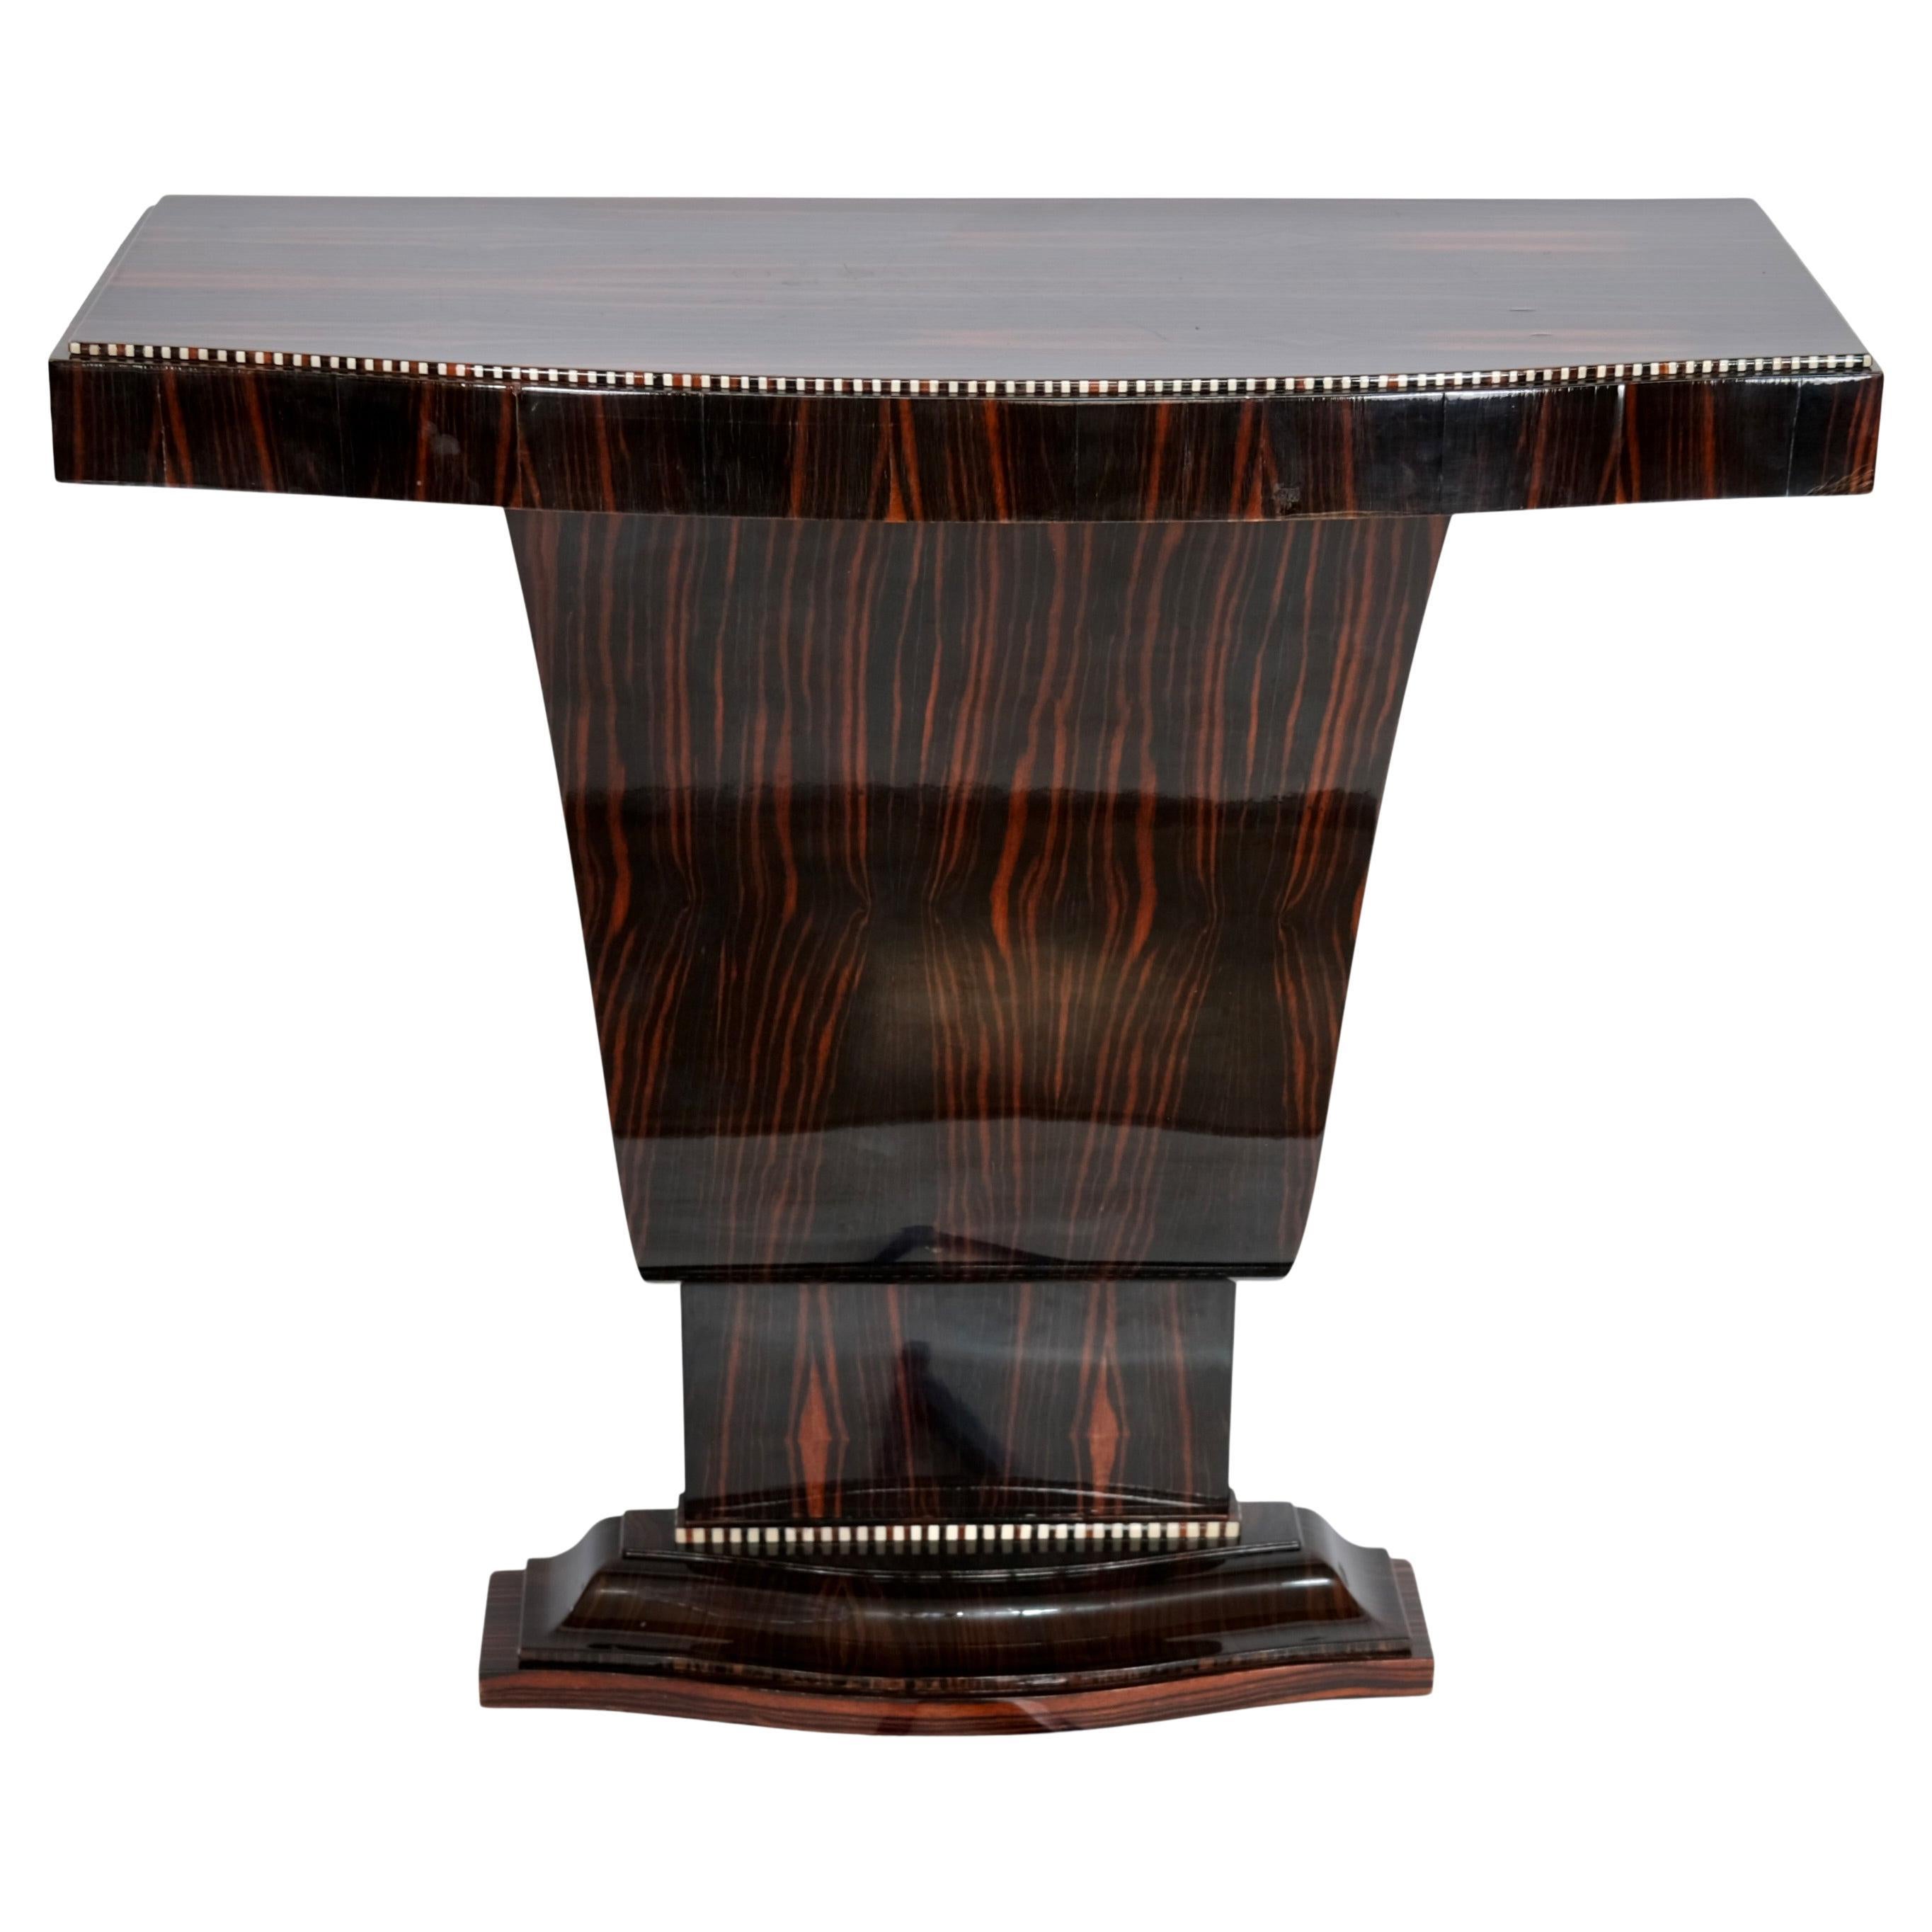 1930s French Art Deco Console Table in Macassar and Two-Tone Inlays